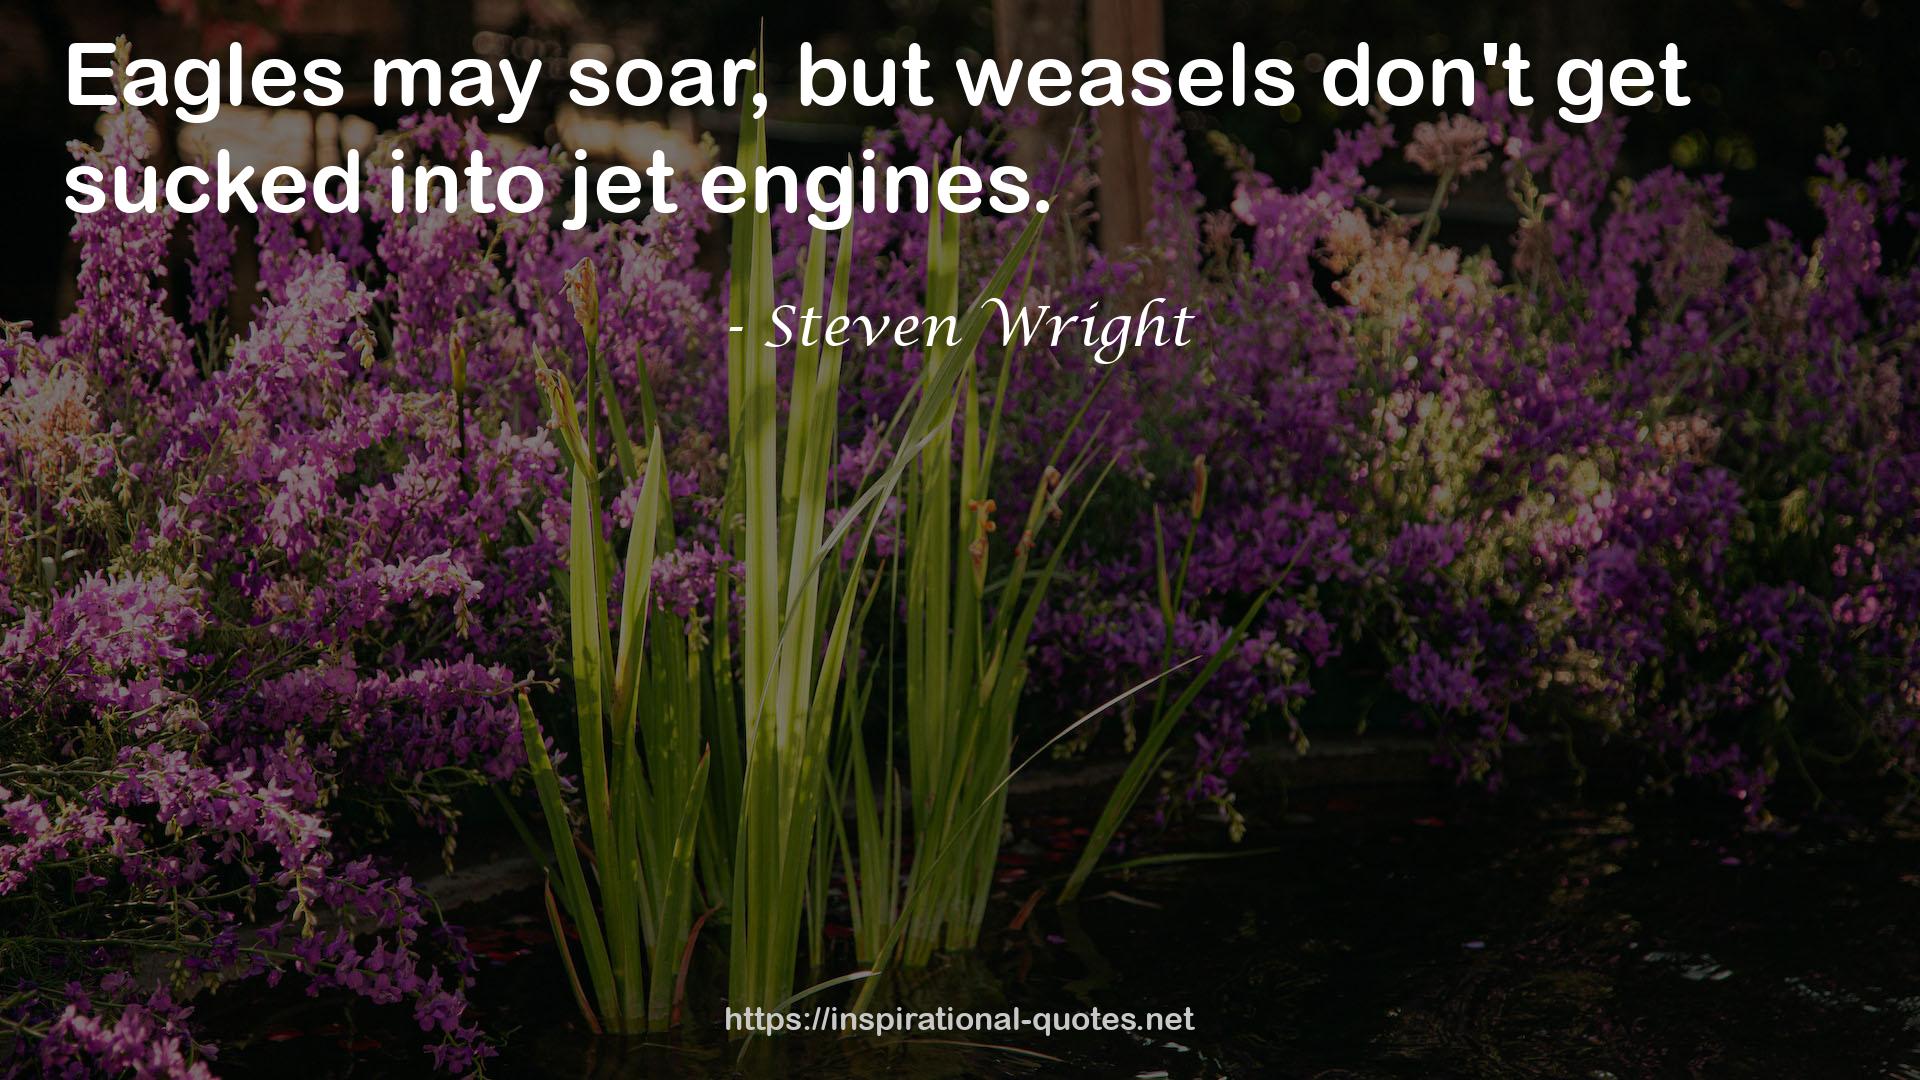 Steven Wright QUOTES